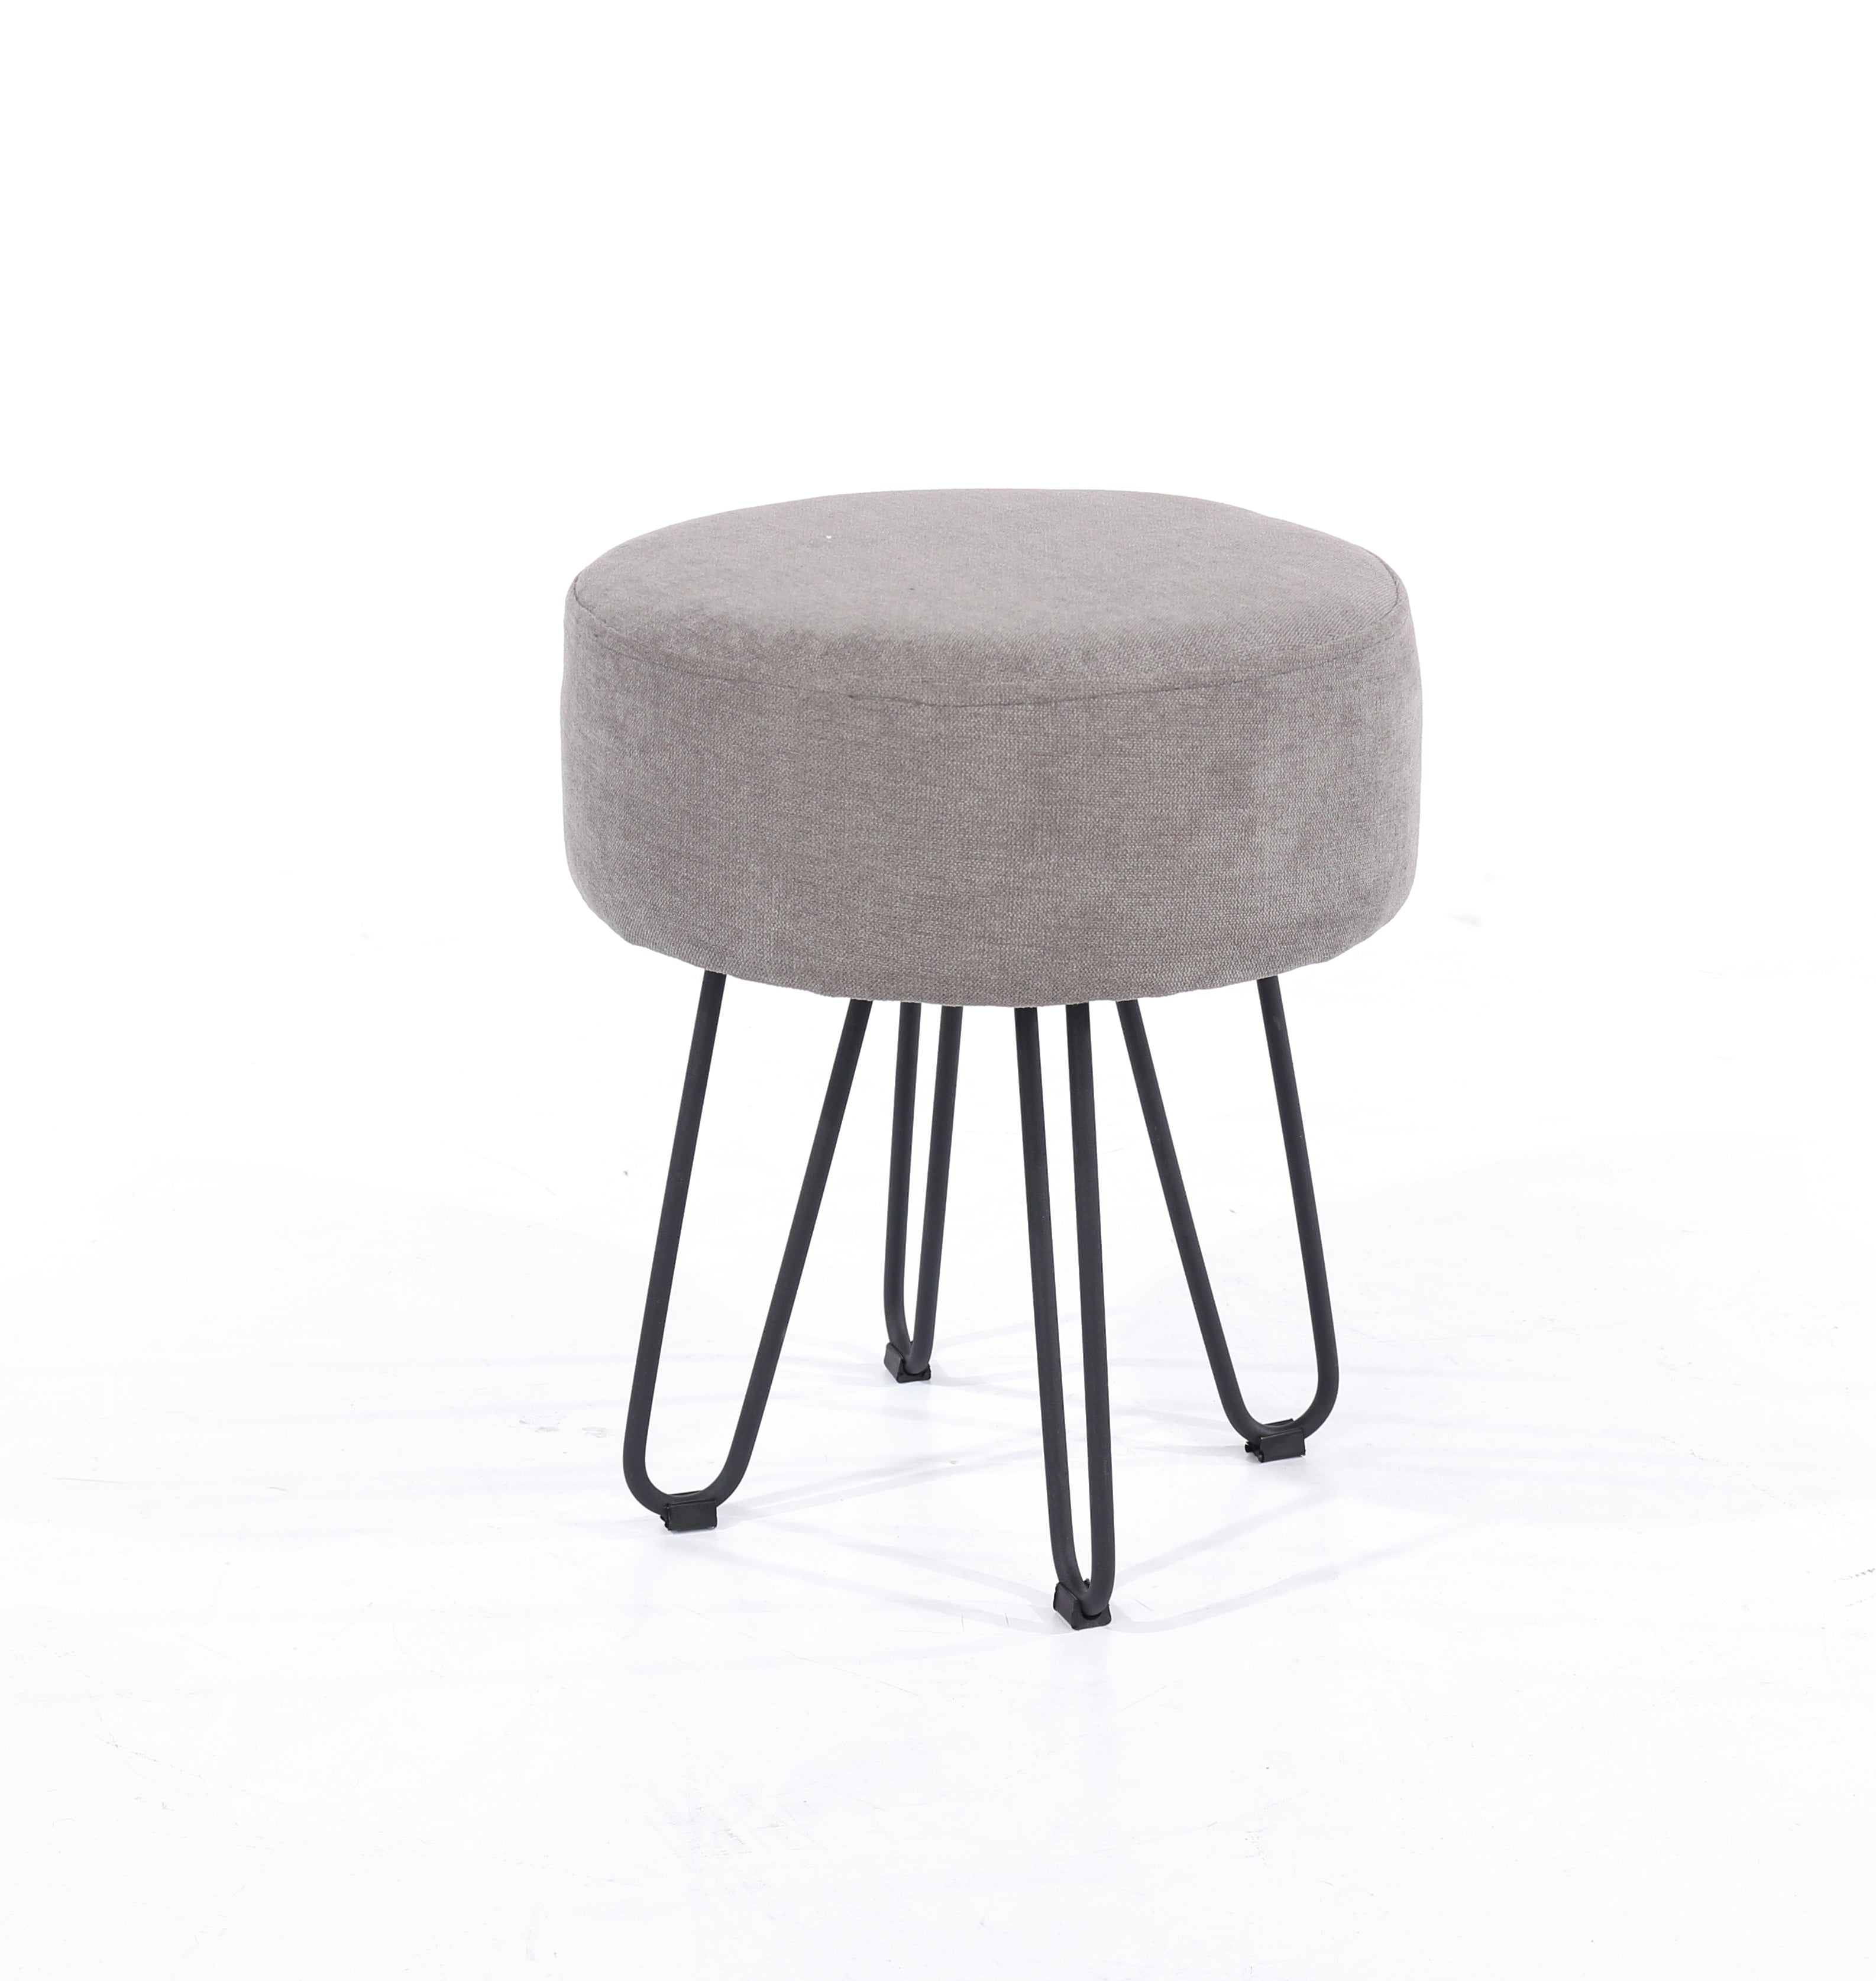 Grey Fabric Upholstered Round Stool With Black Metal Legs